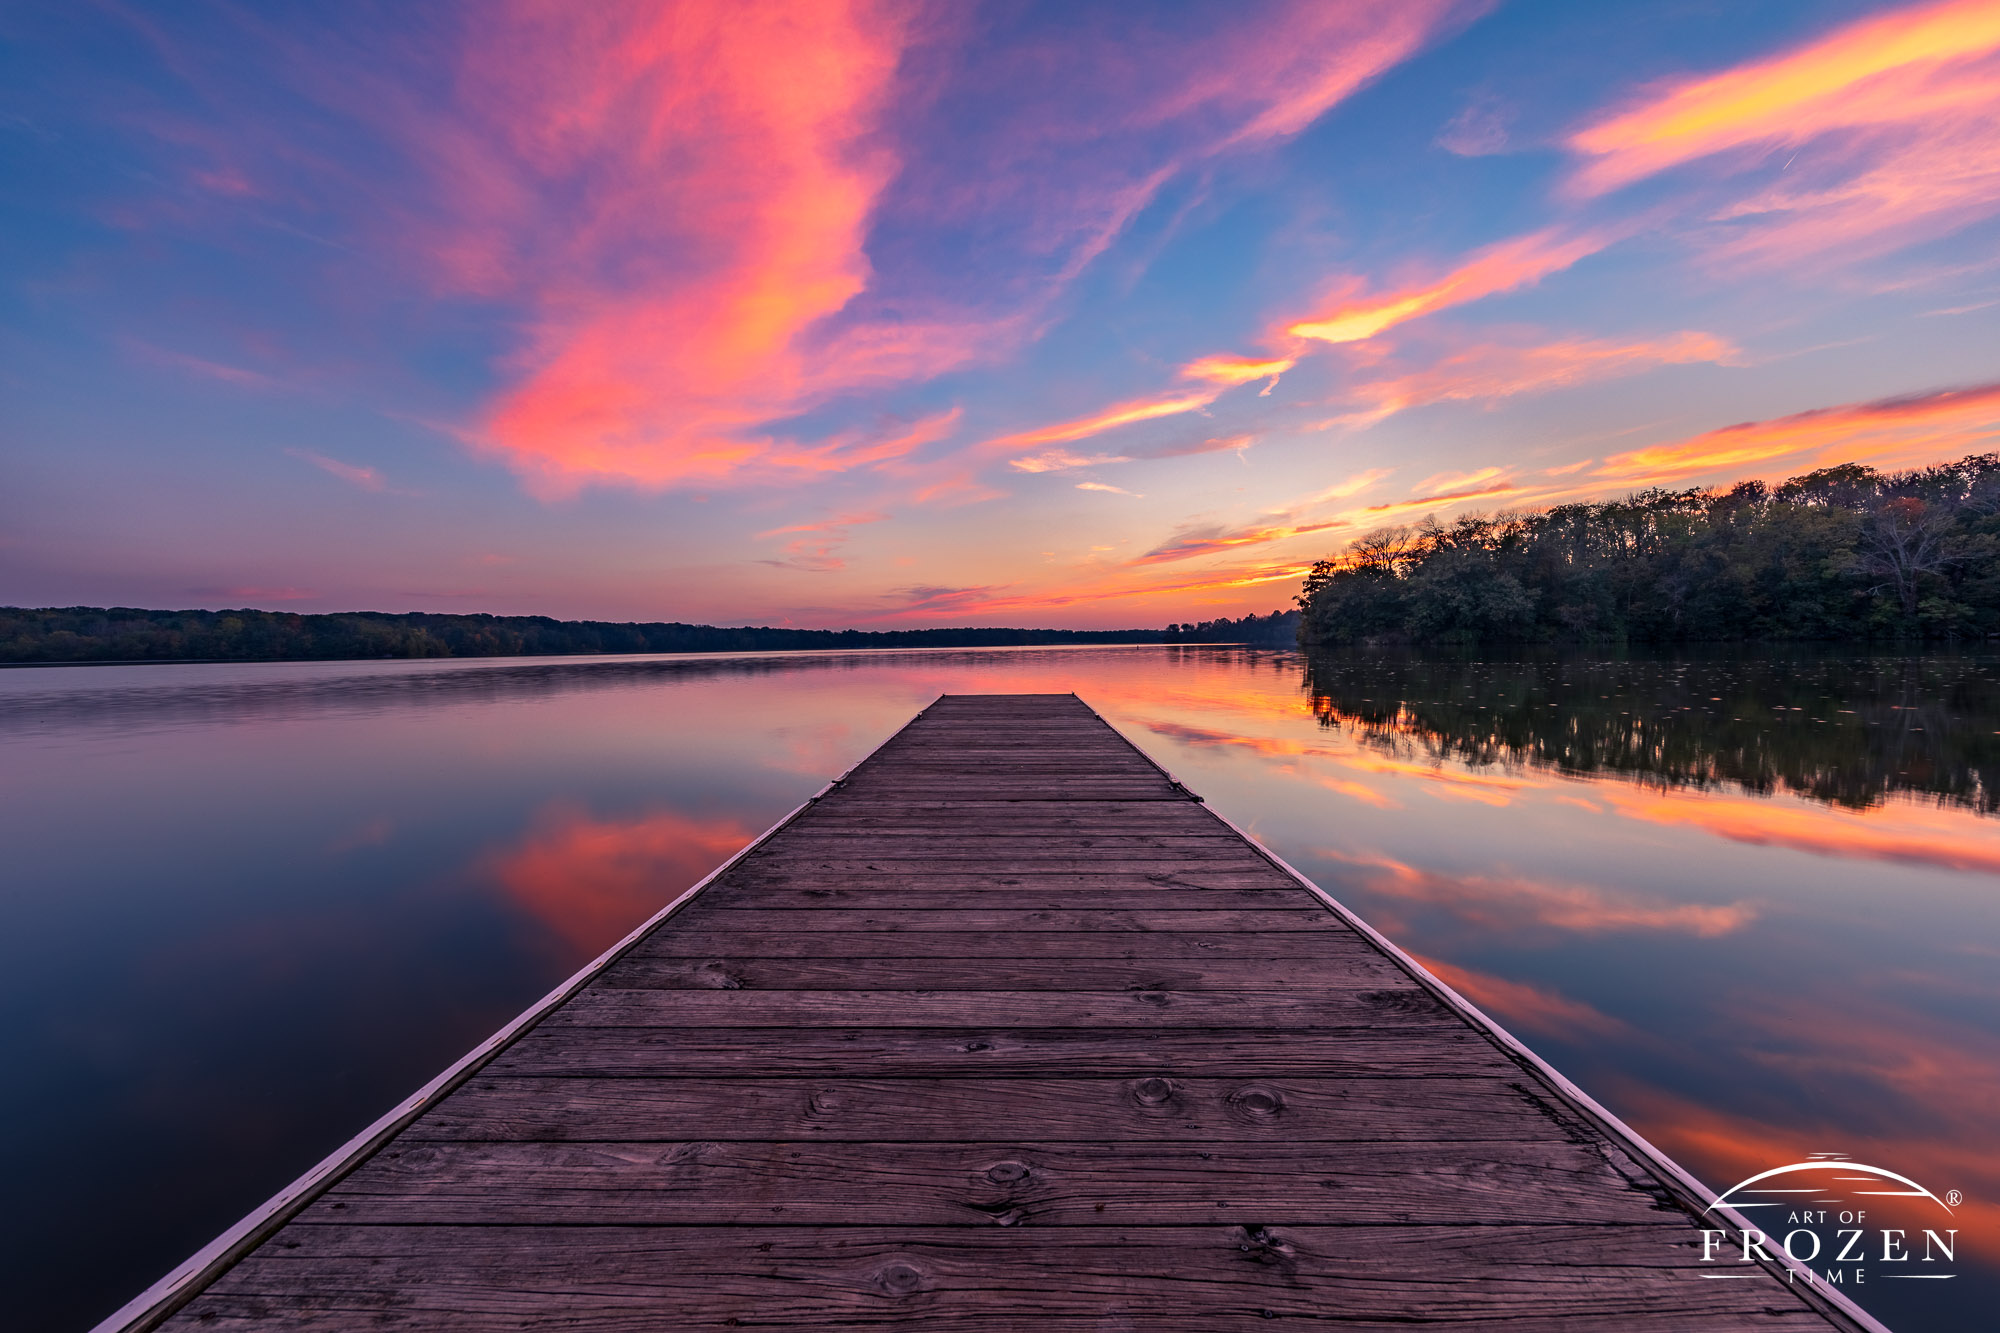 A boat dock leading the eye to the horizon where cirrus clouds bask in orange colors of twilight and calm lake waters reflect the sky above